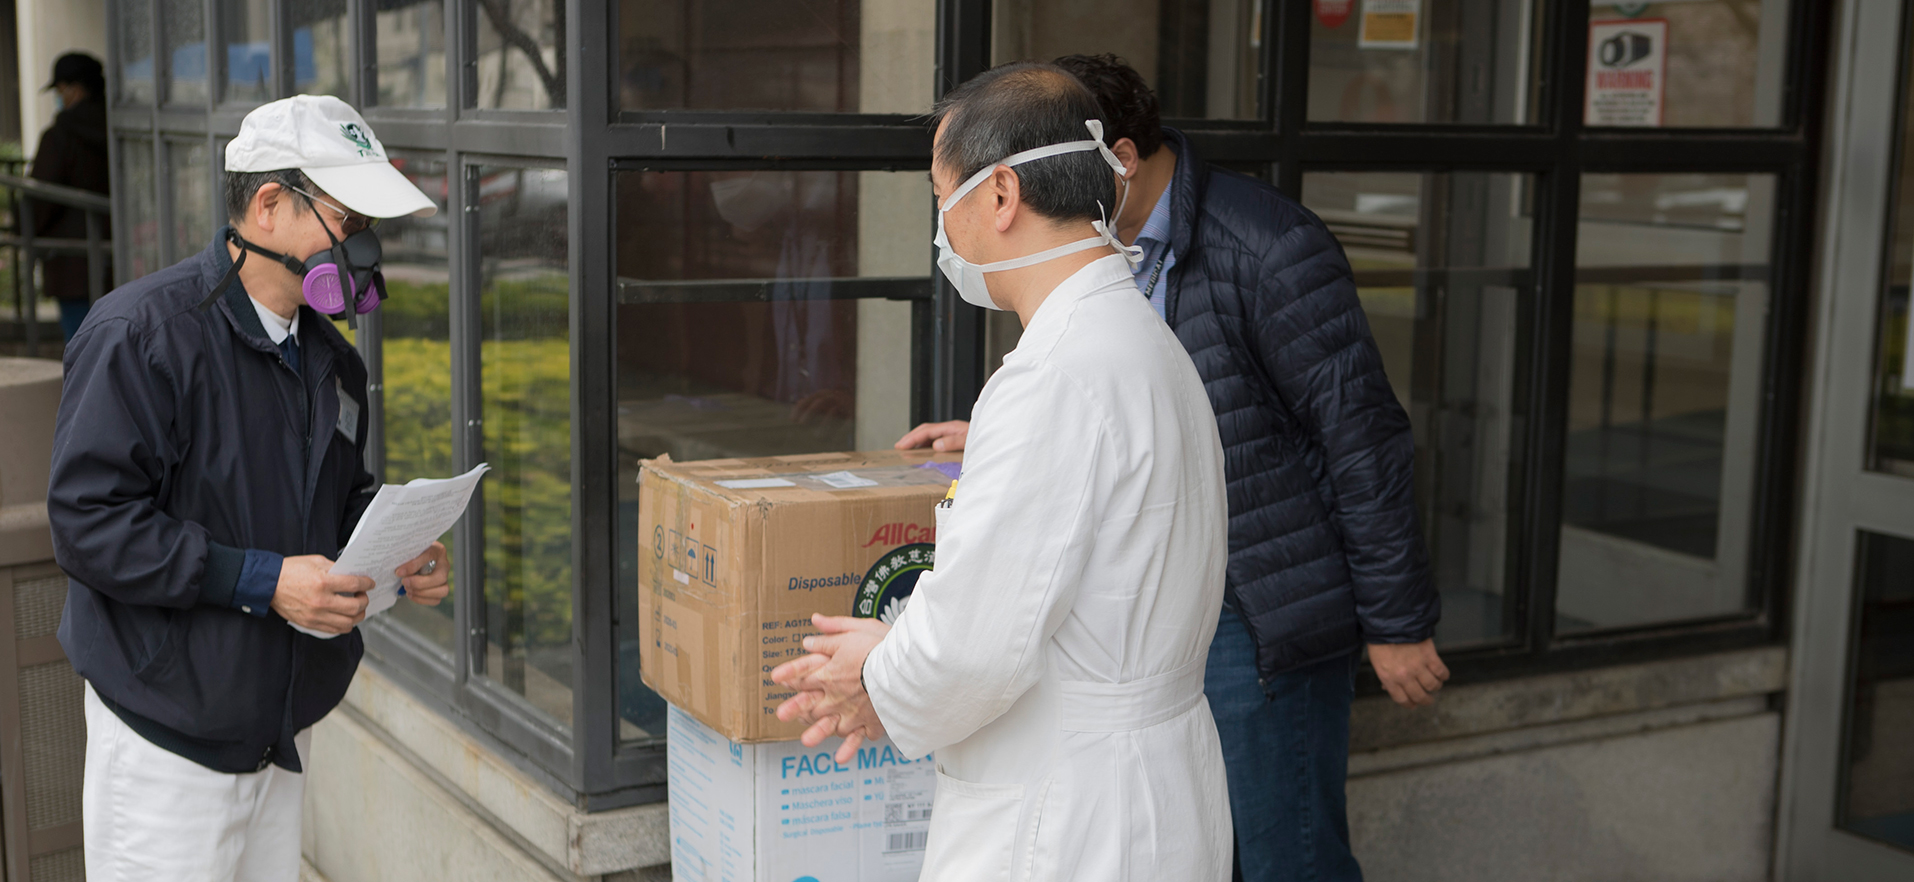 Overwhelmed NYC Hospitals Get a Helping Hand from Tzu Chi NY